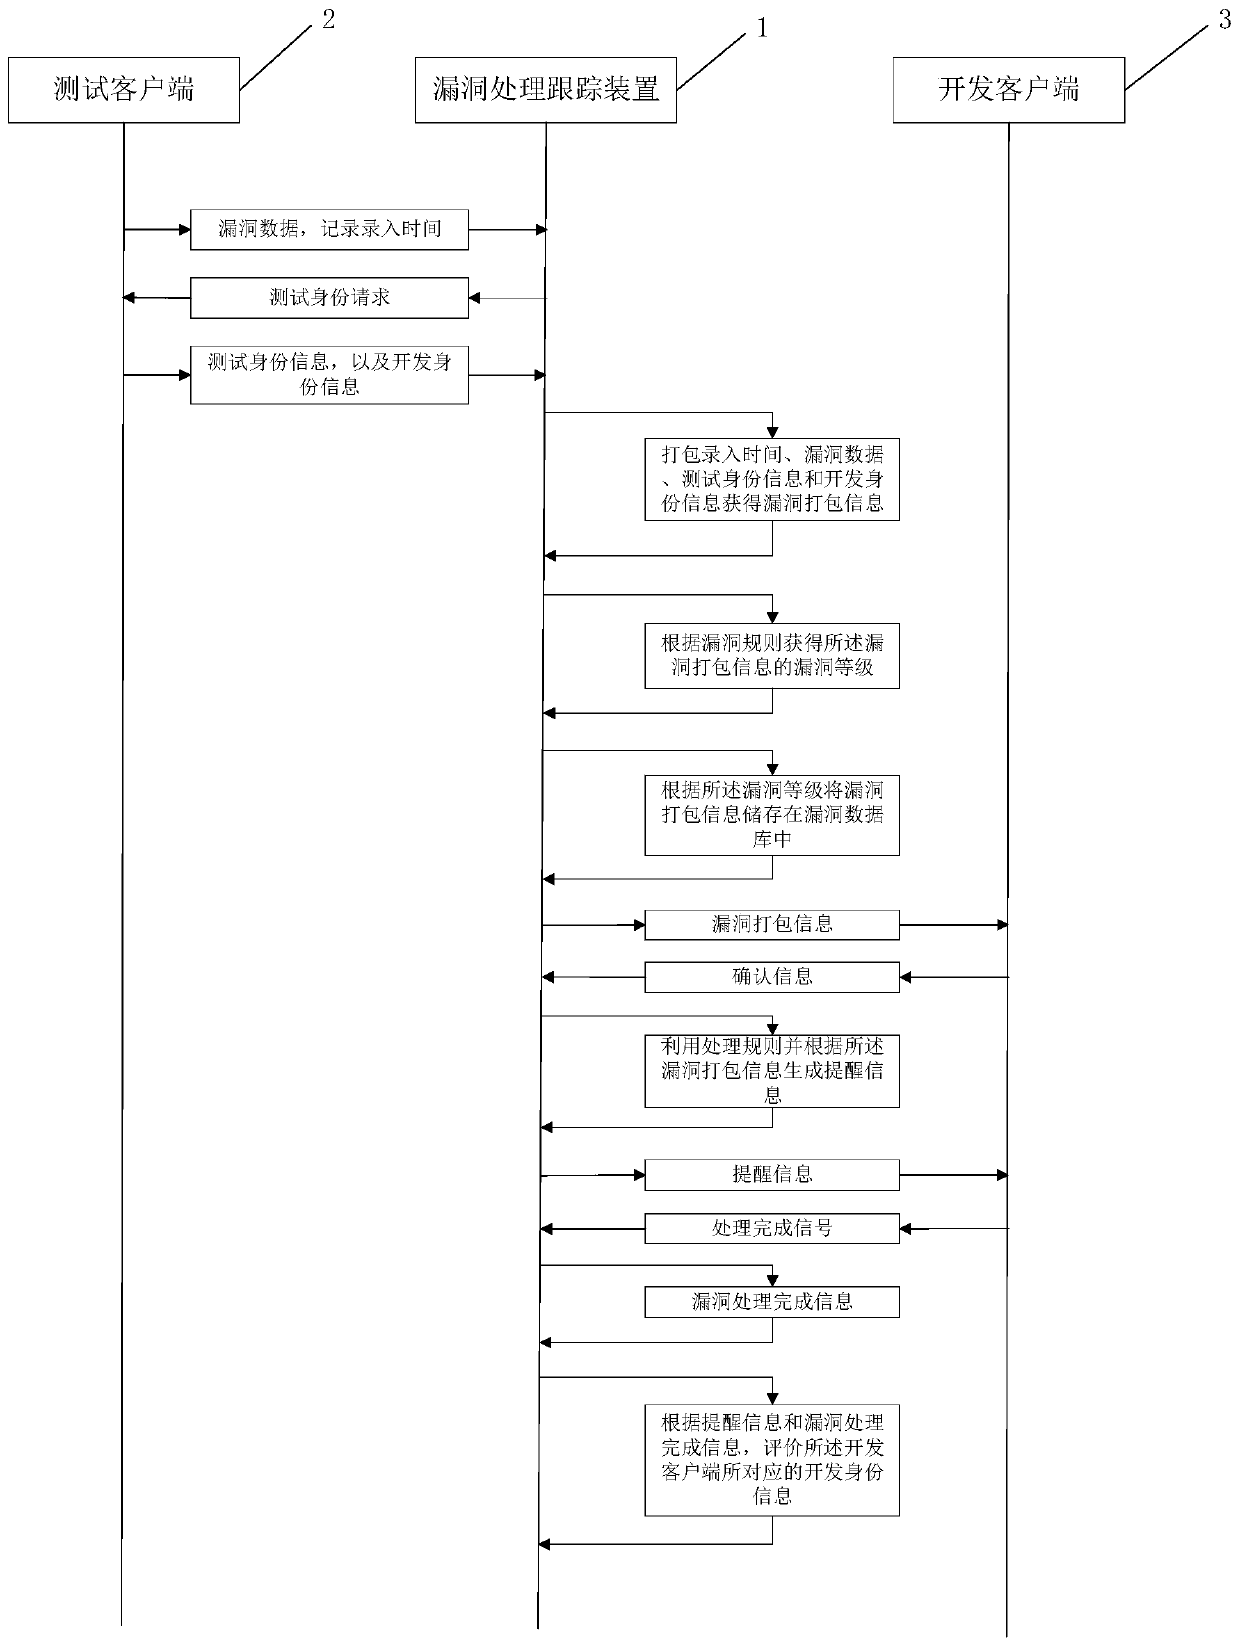 Vulnerability processing and tracking method and device, computer system and readable storage medium